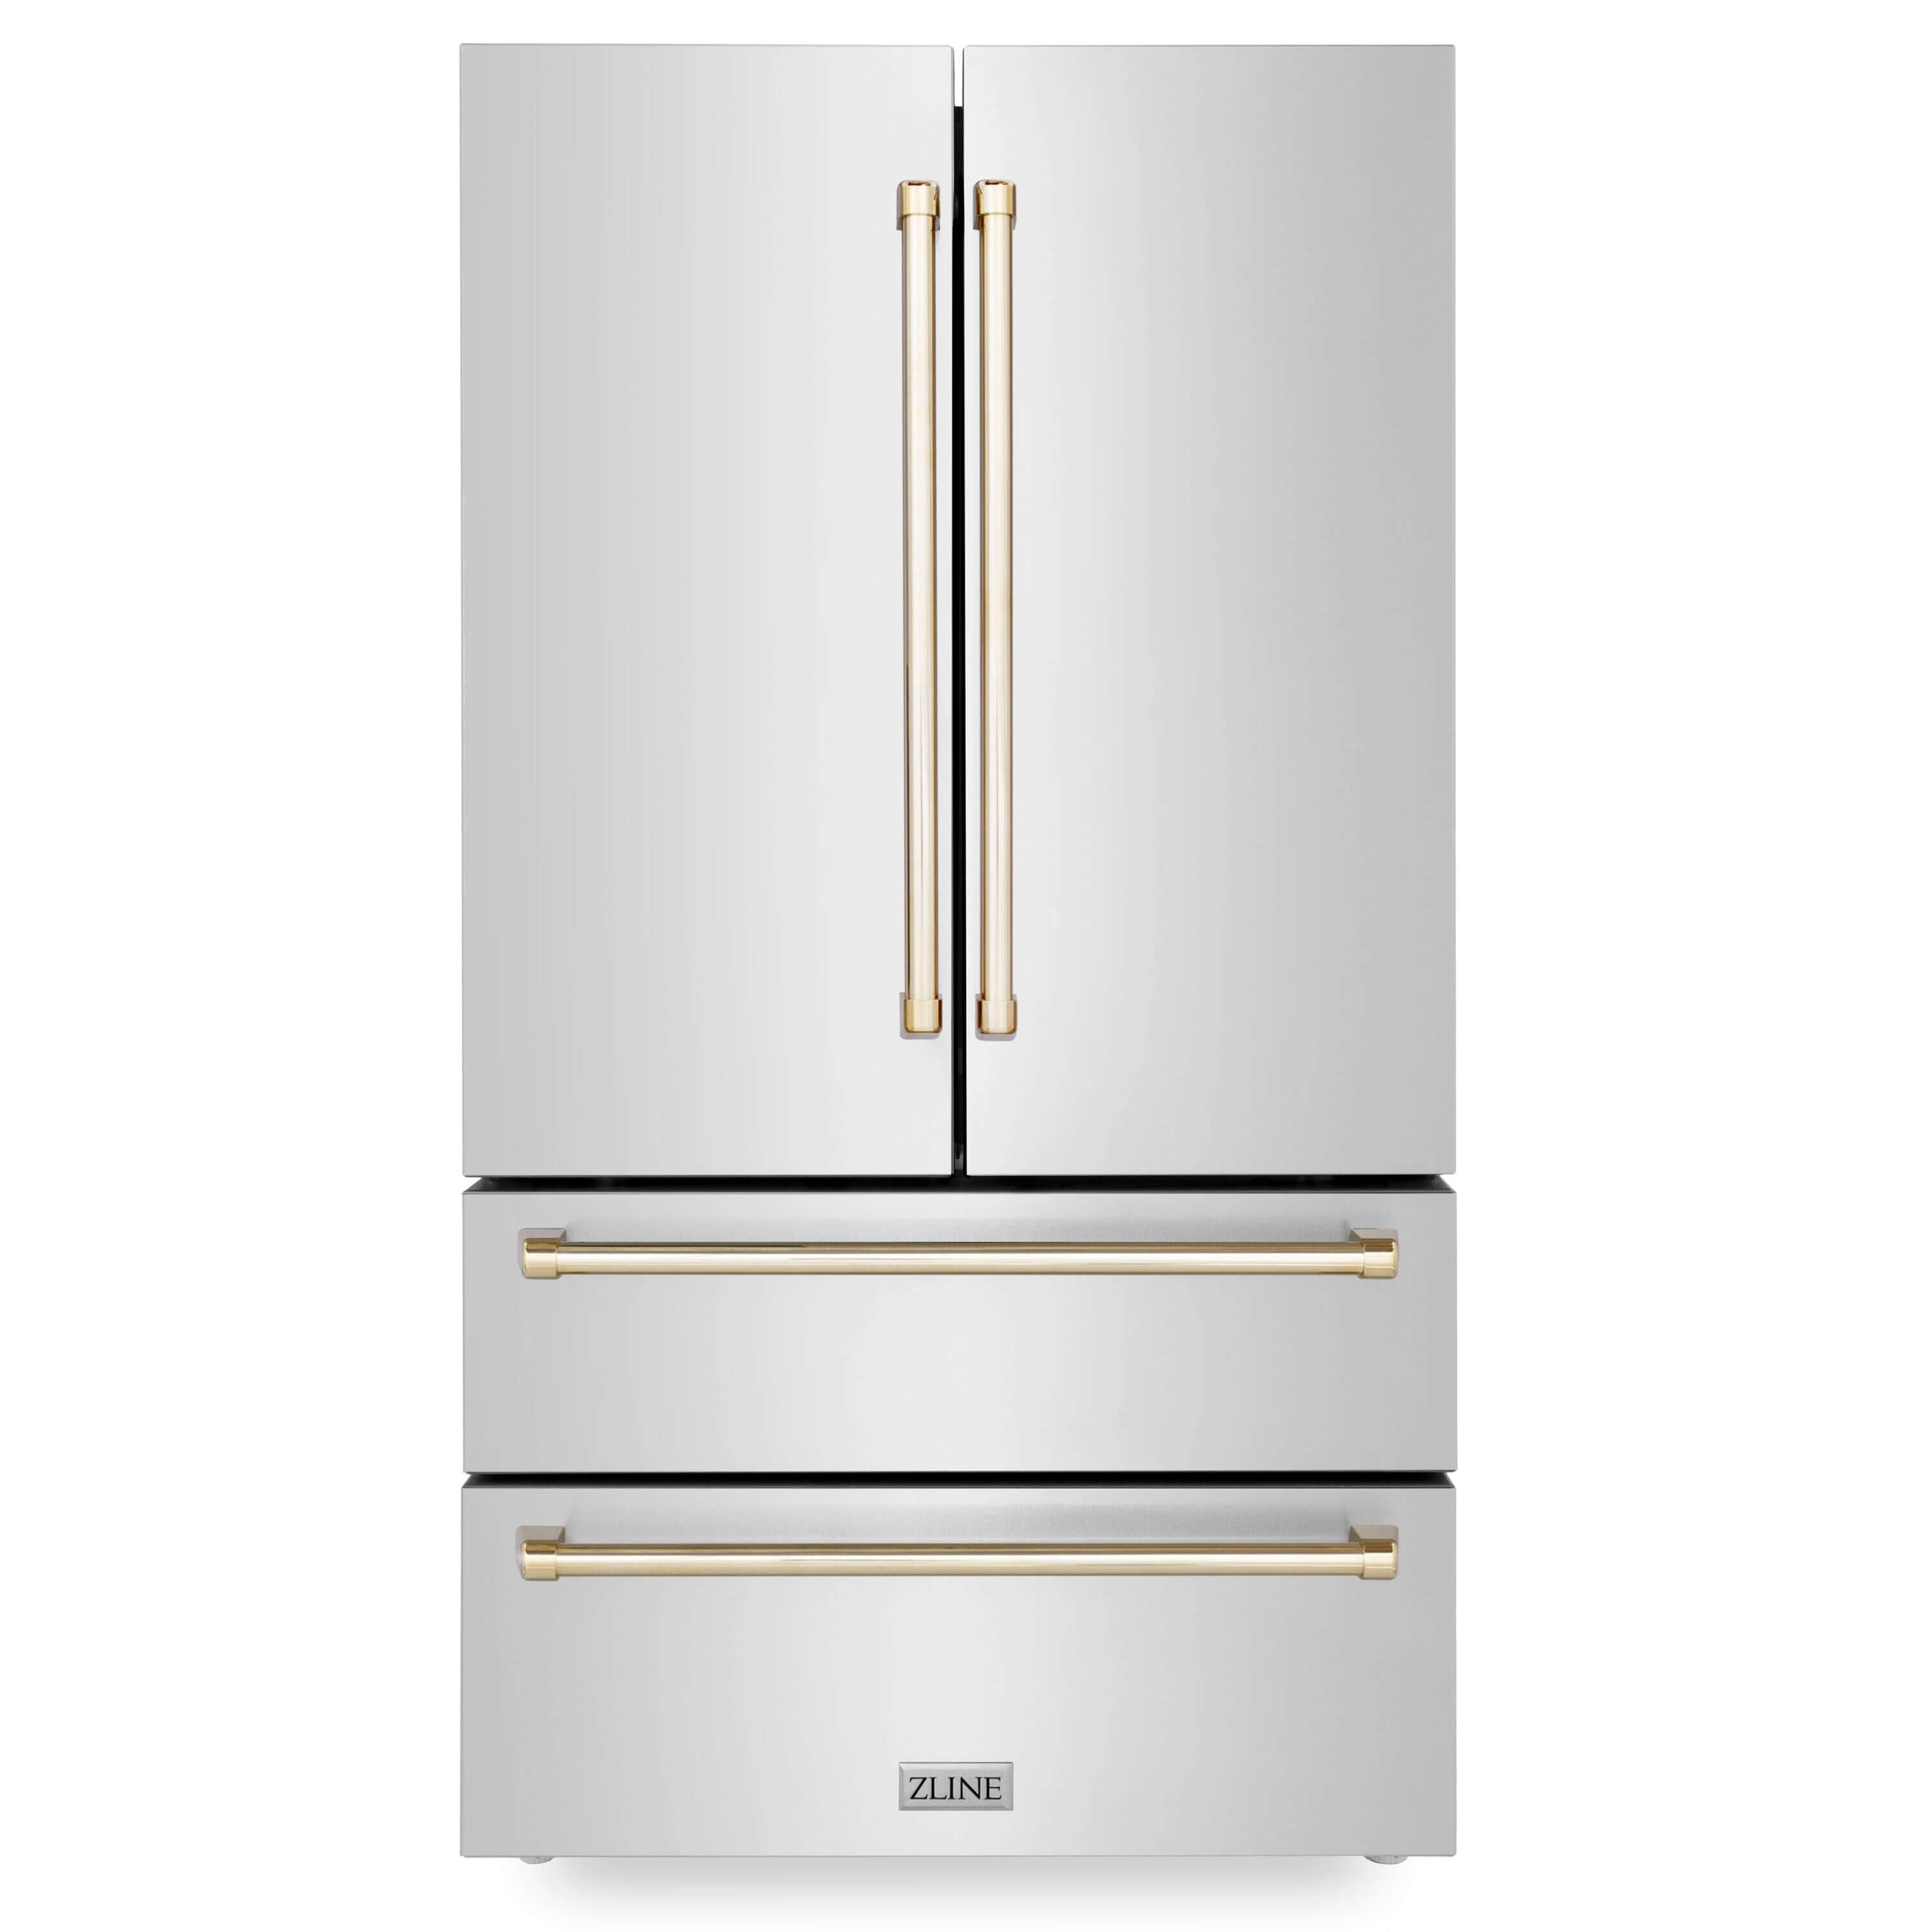 ZLINE Autograph Edition 36 in. 22.5 cu. ft Freestanding French Door Refrigerator with Ice Maker in Fingerprint Resistant Stainless Steel with Polished Gold Accents (RFMZ-36-G) front, closed.